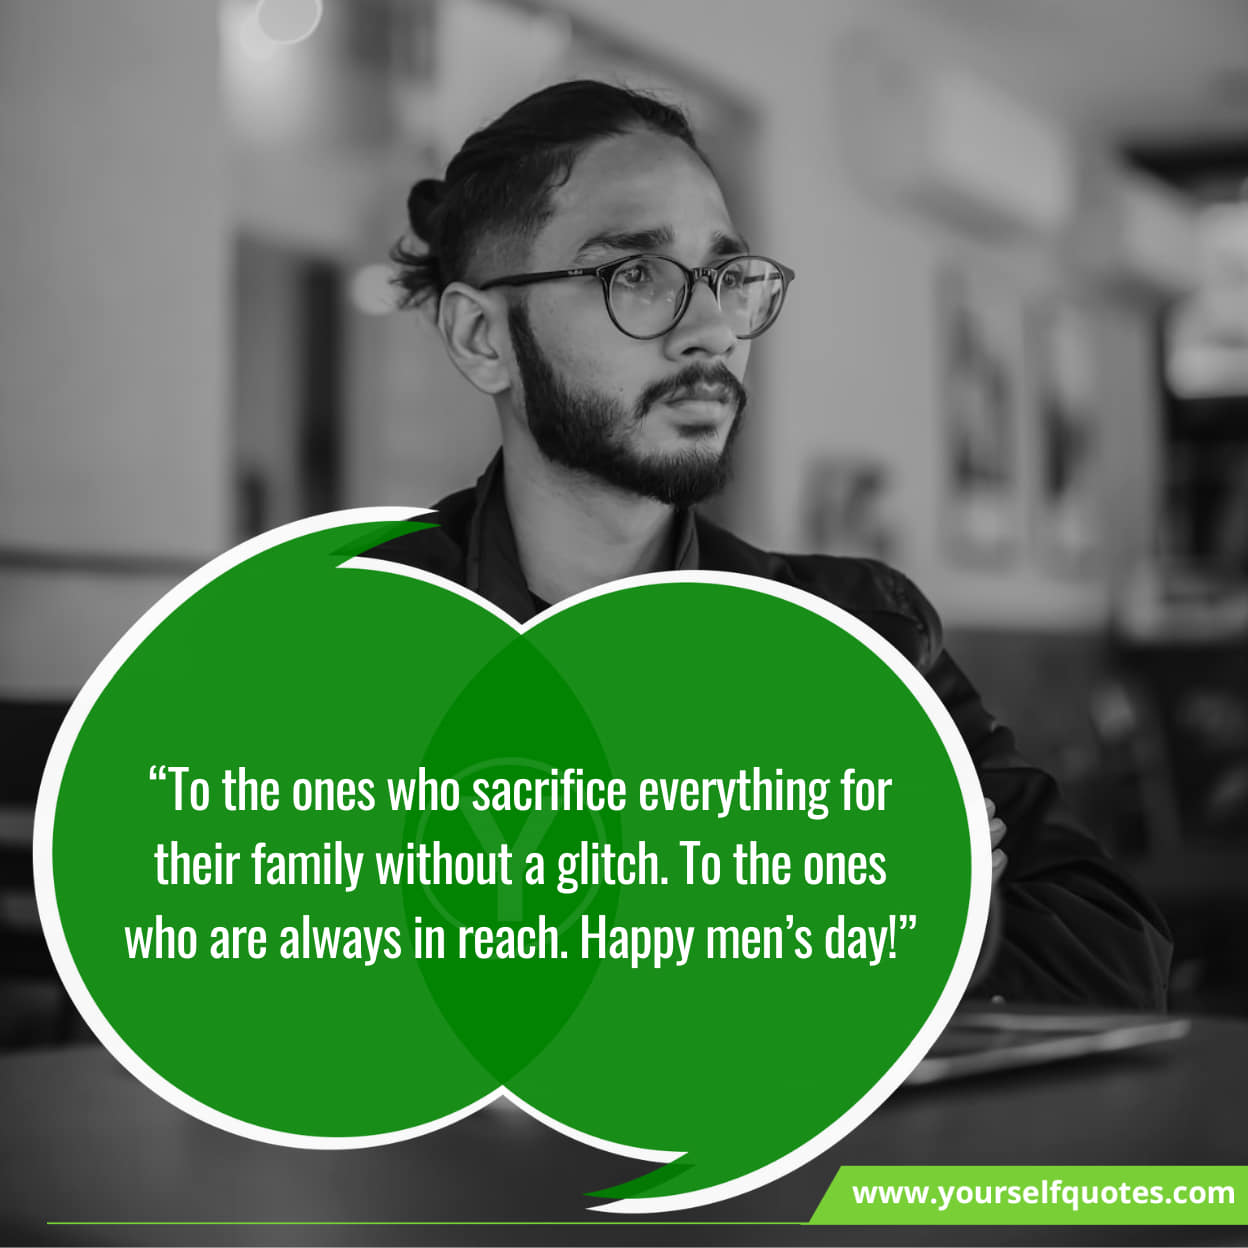 Heart-Warming Happy Men’s Day Wishes, Quotes